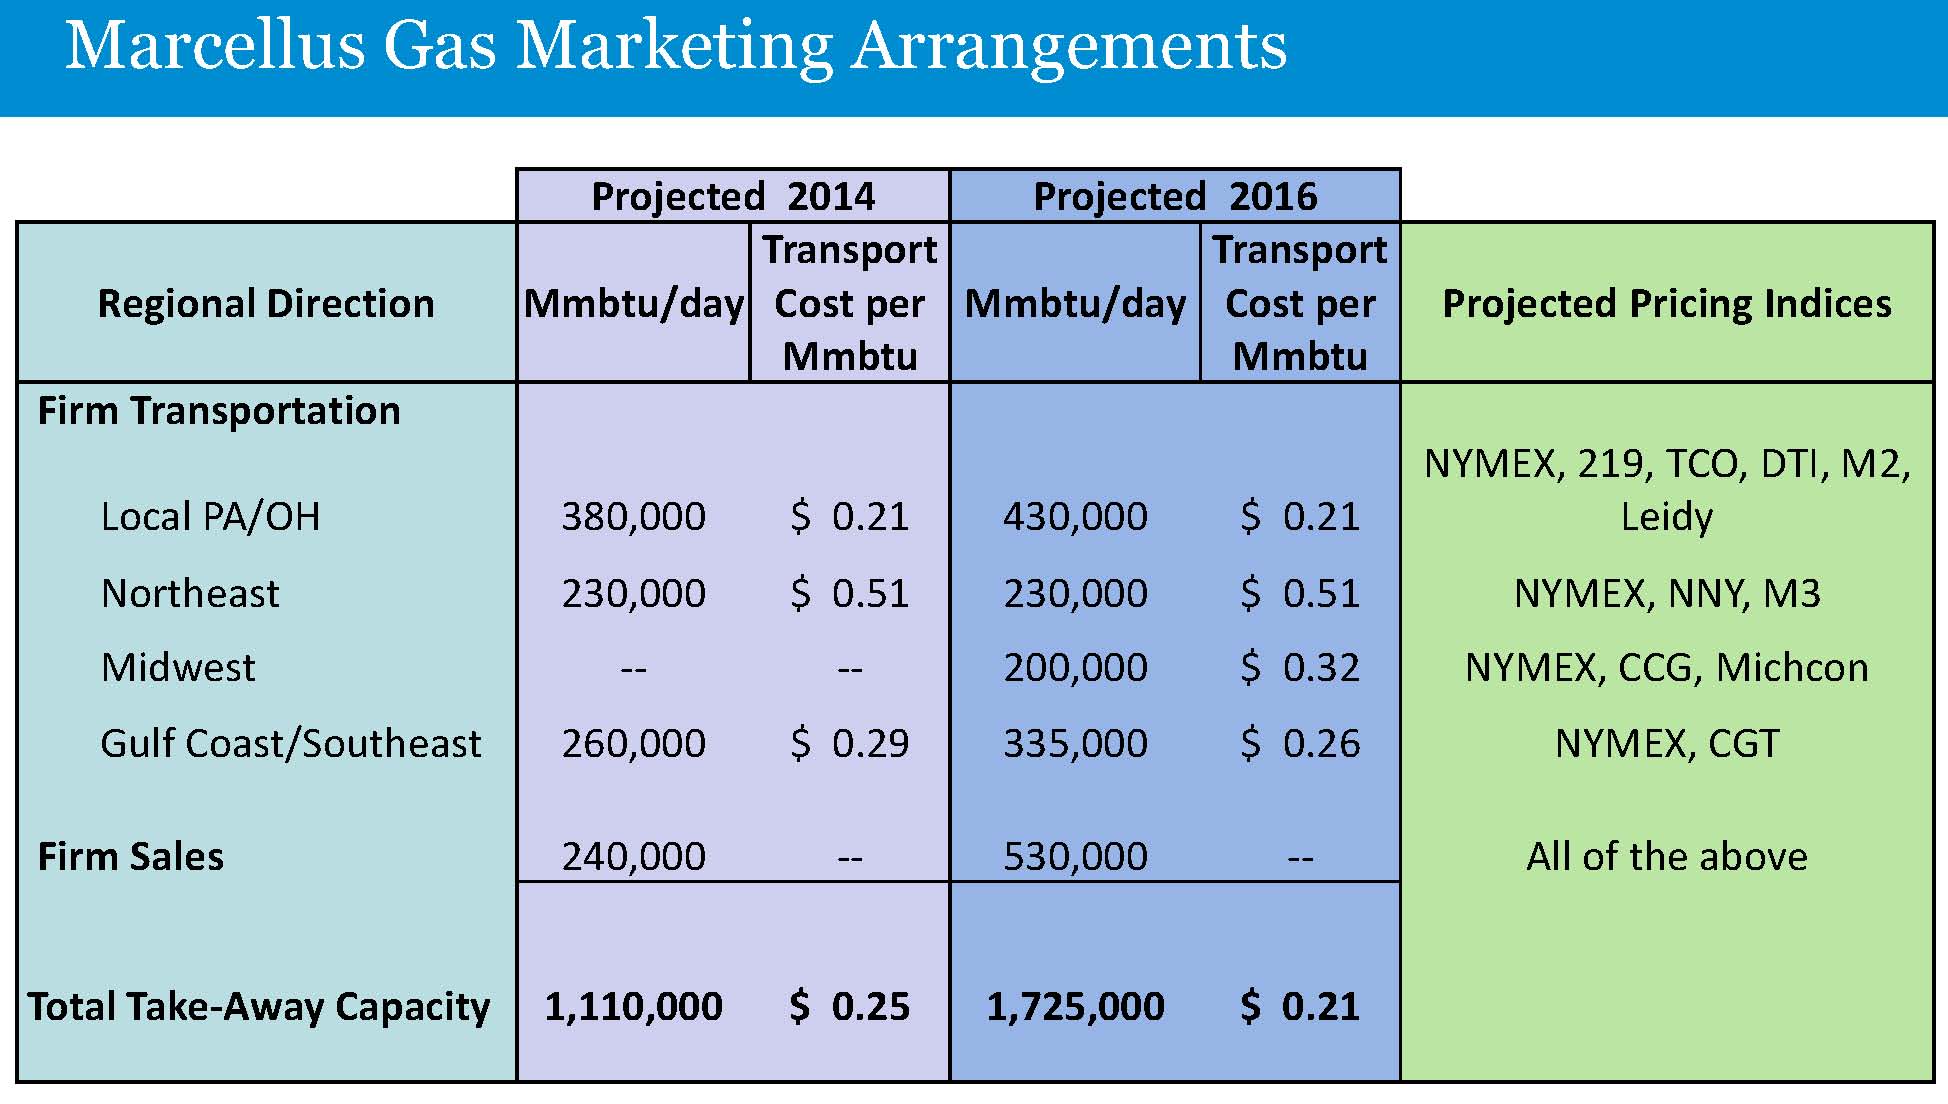 Range Resources Reveals Marketing Arrangements; Forecasting 16% Drop in Transportation Costs by 2016